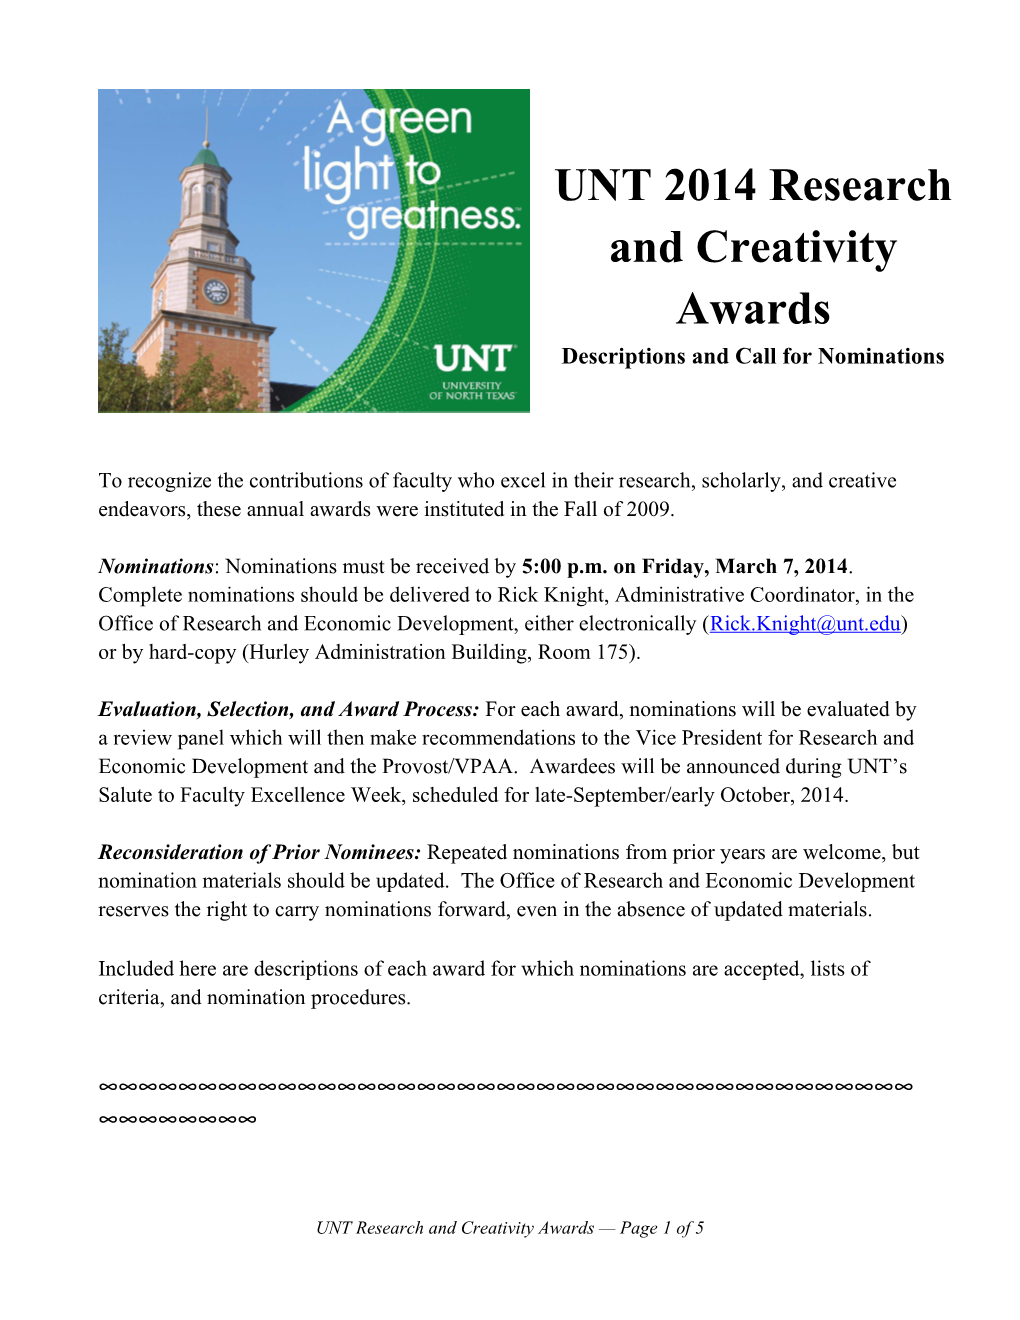 UNT 2014 Research and Creativity Awards